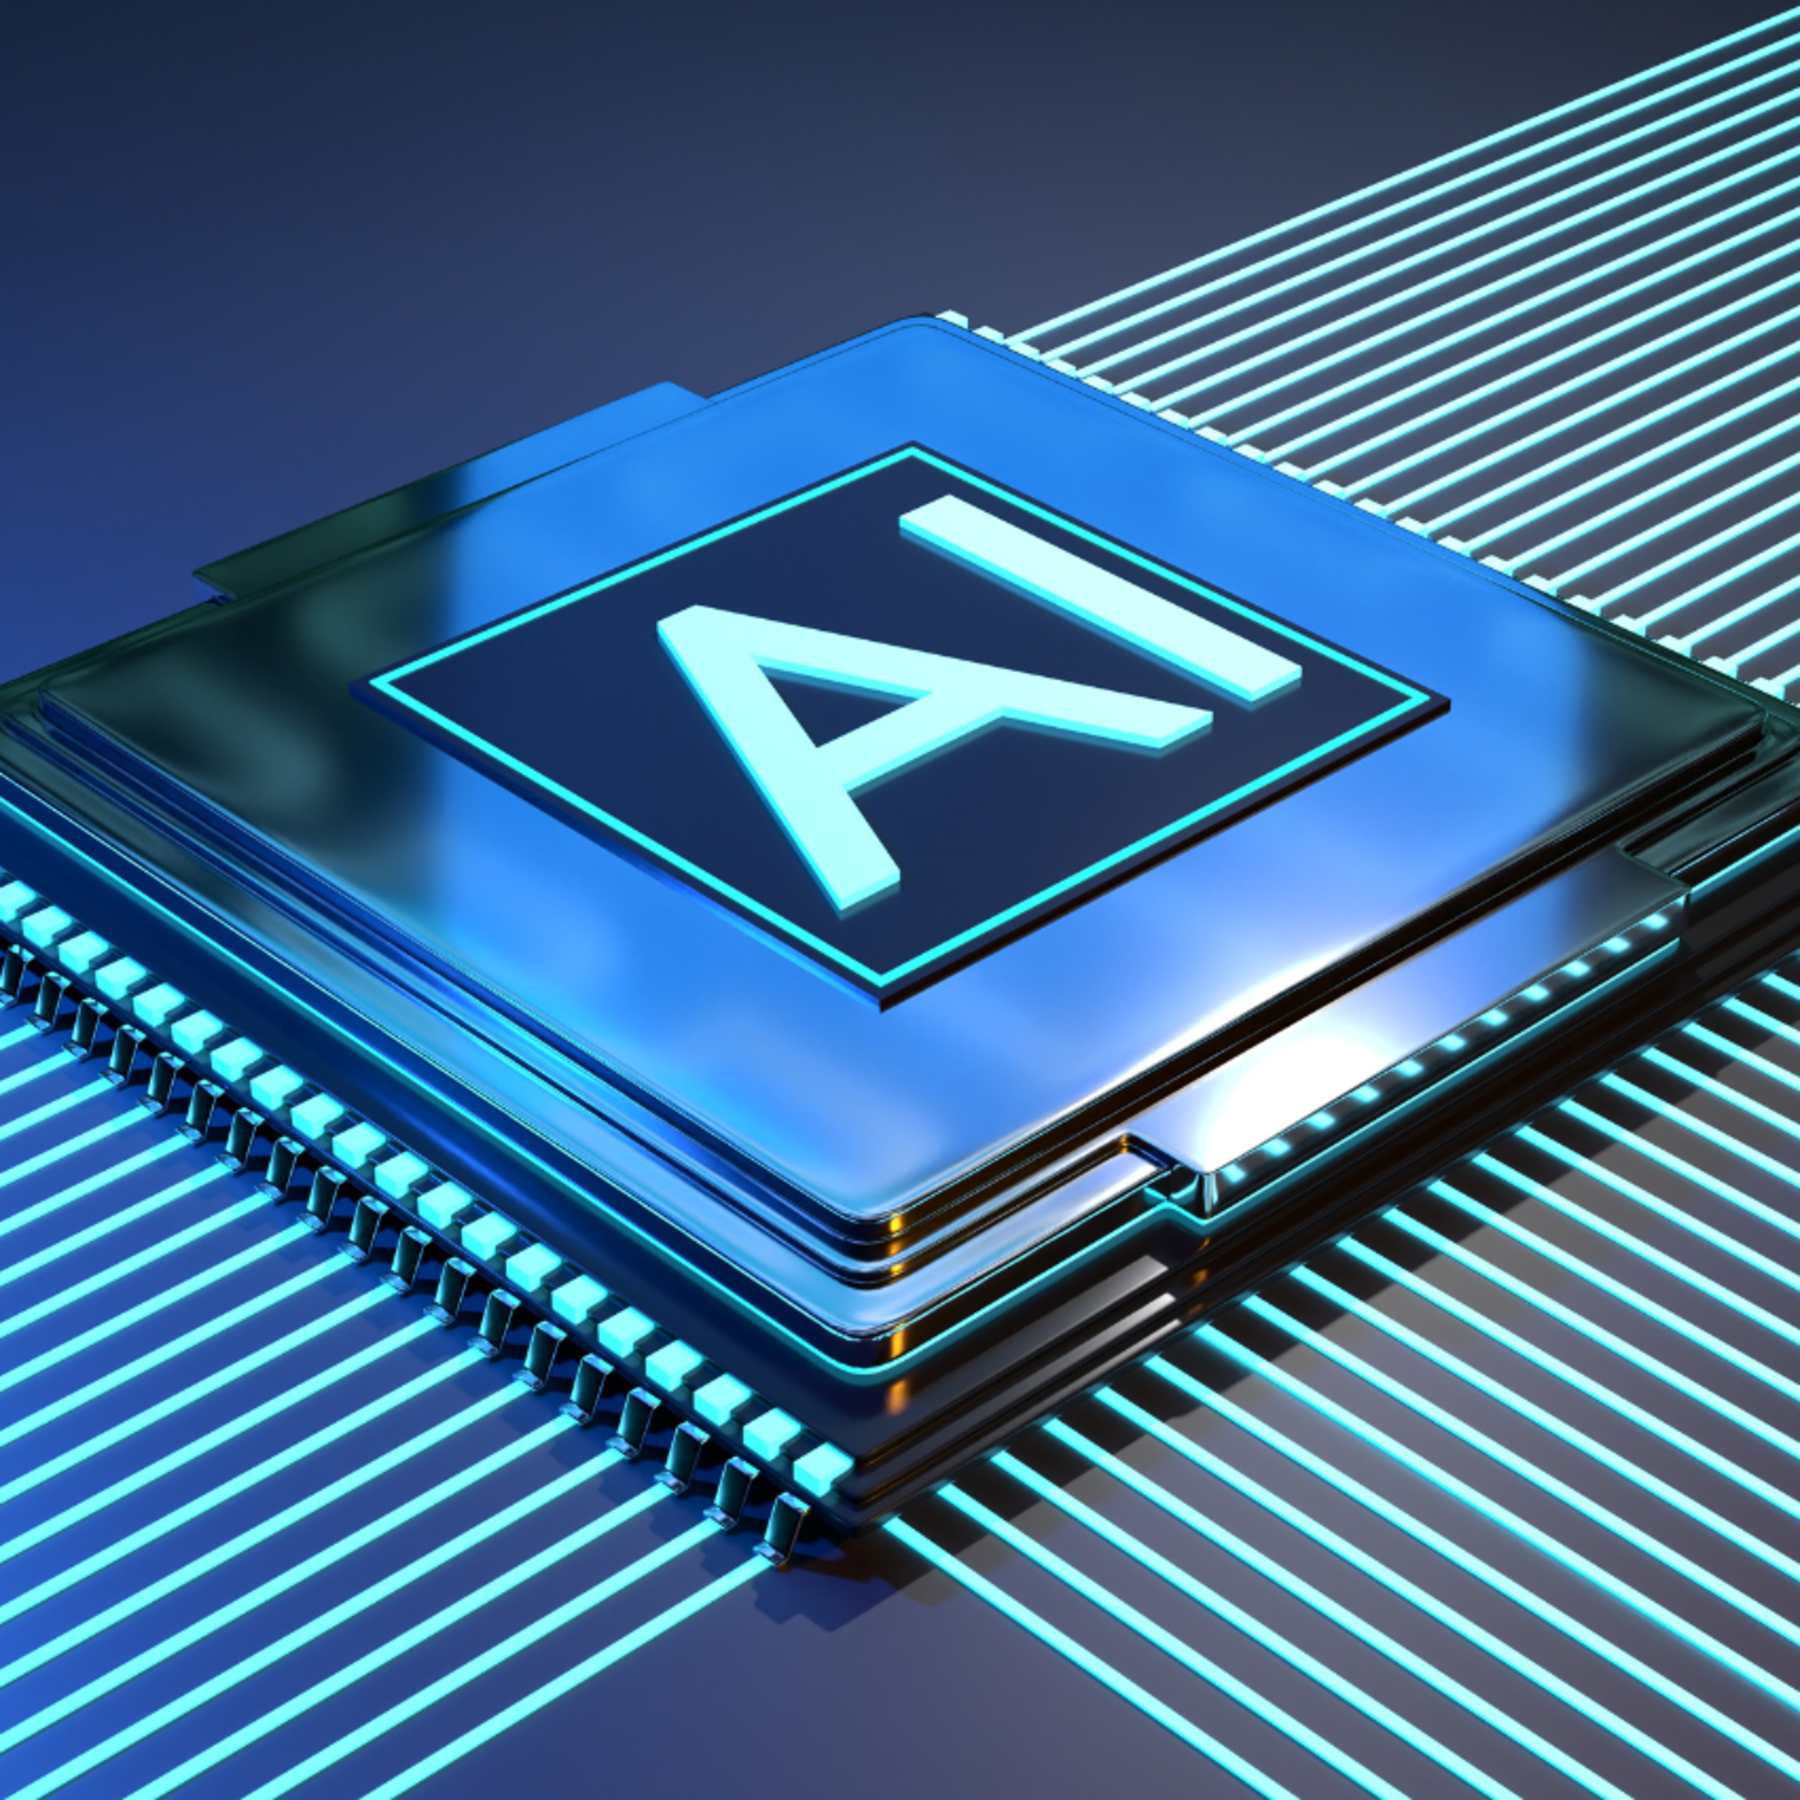 A computer chip with "AI" written on it